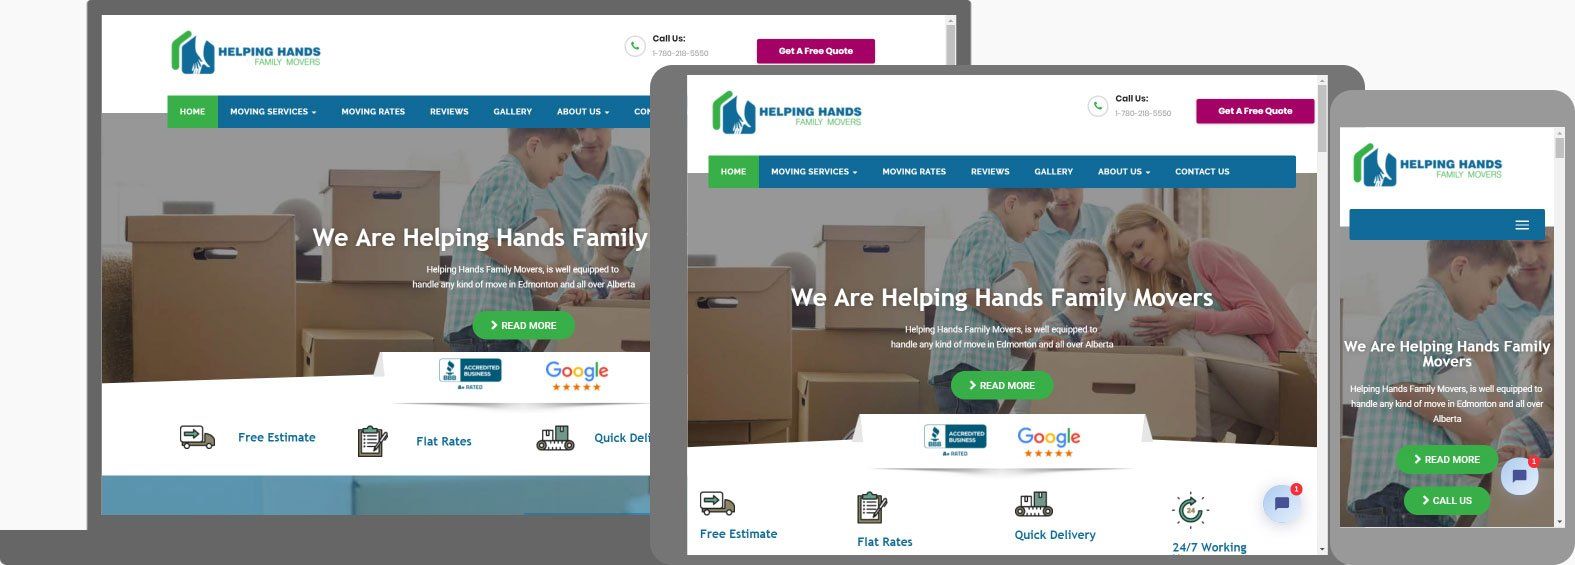 Moving Company Website Design - Helping Hands Family Movers